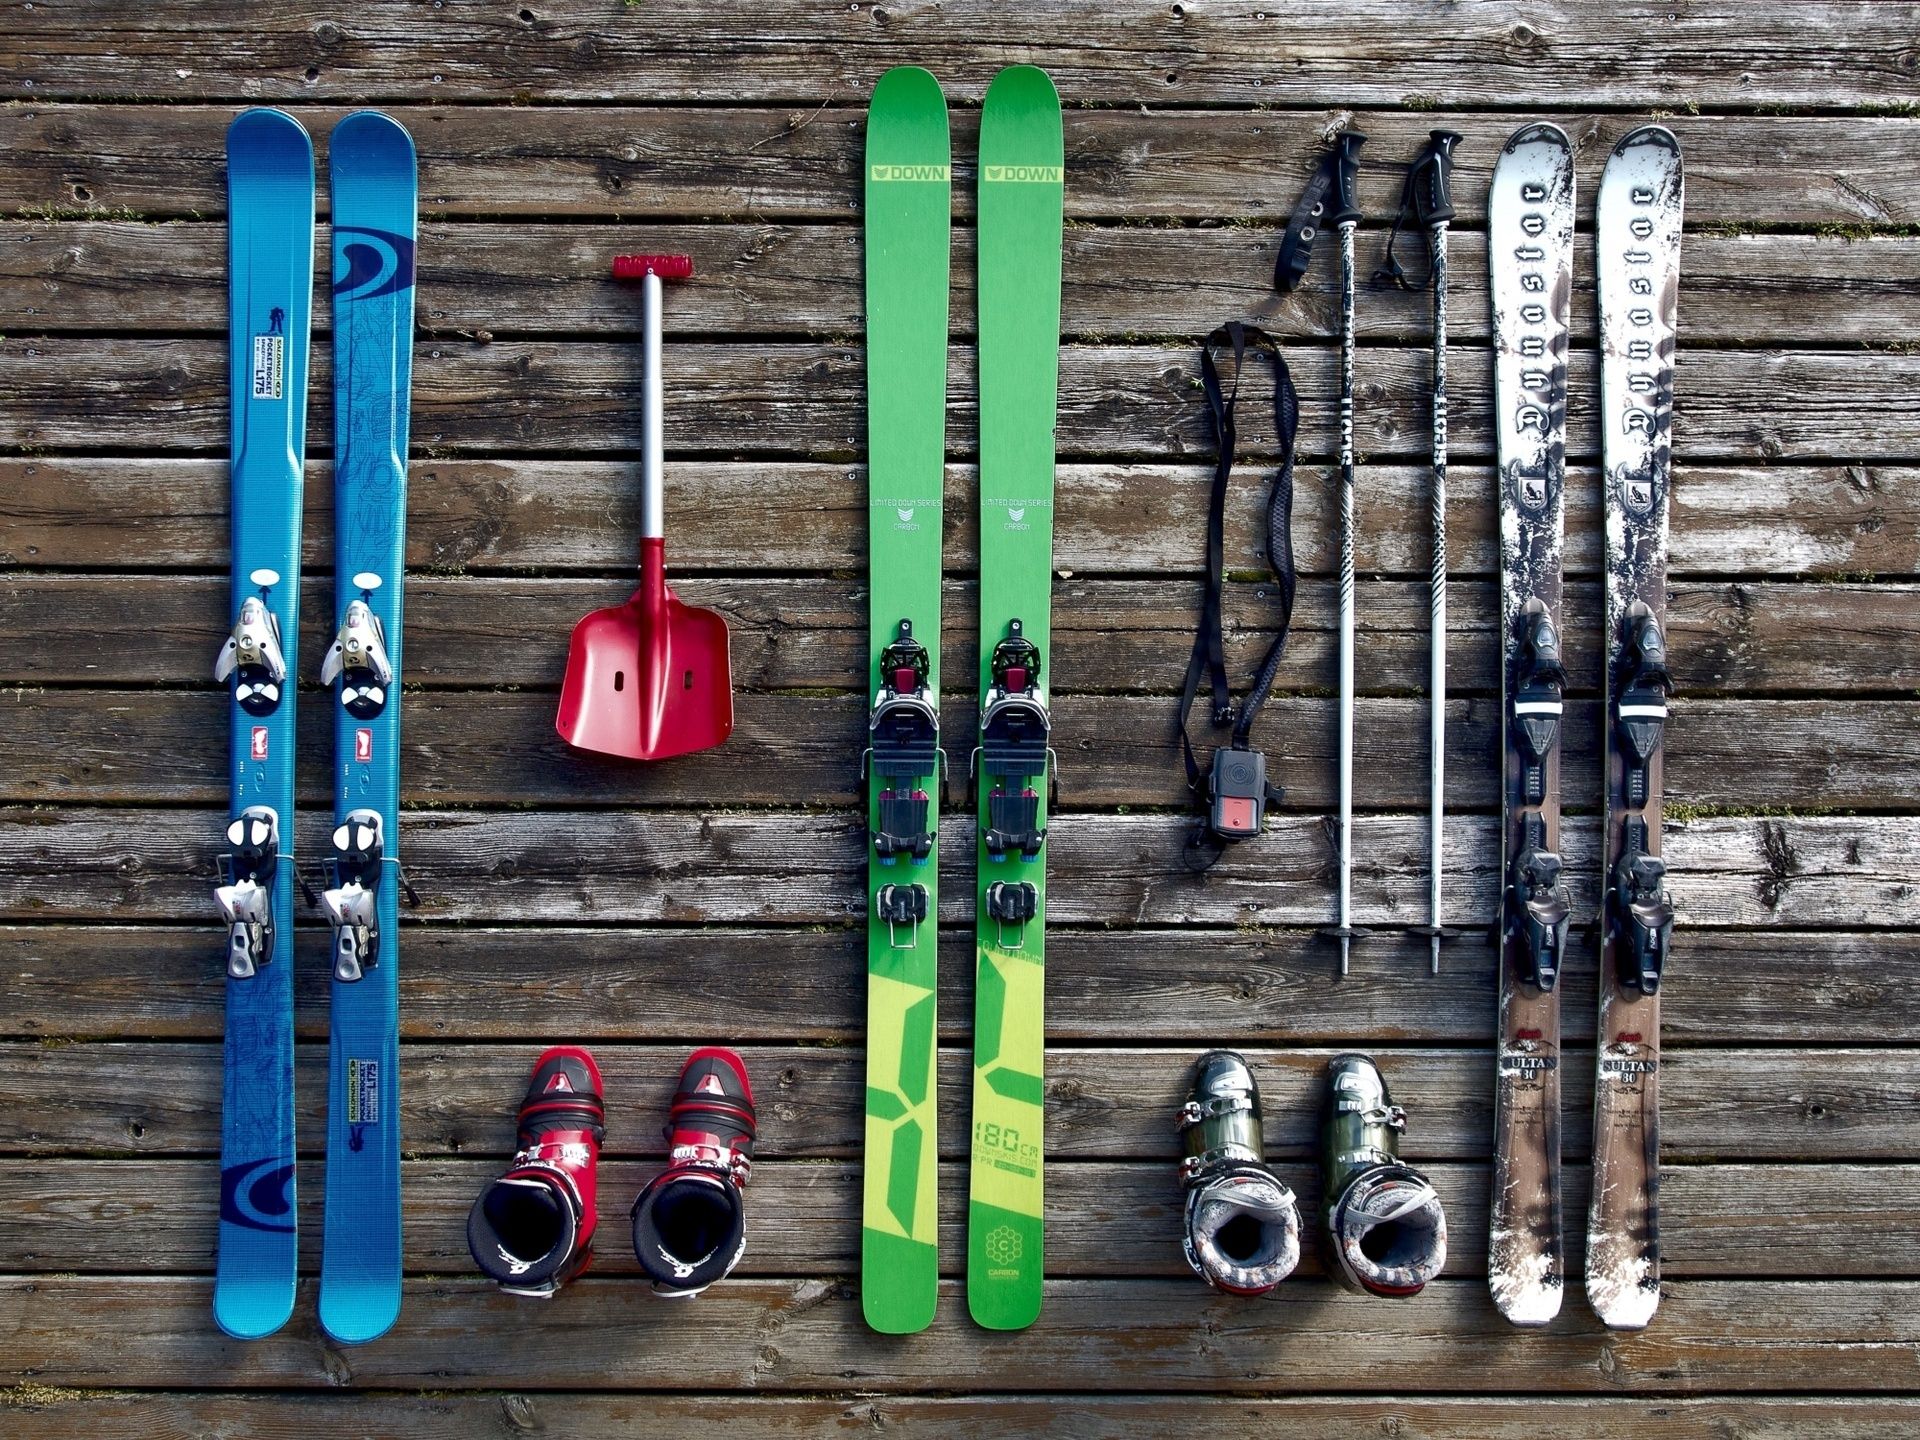 Skis and other basic freeride skiing equipment.